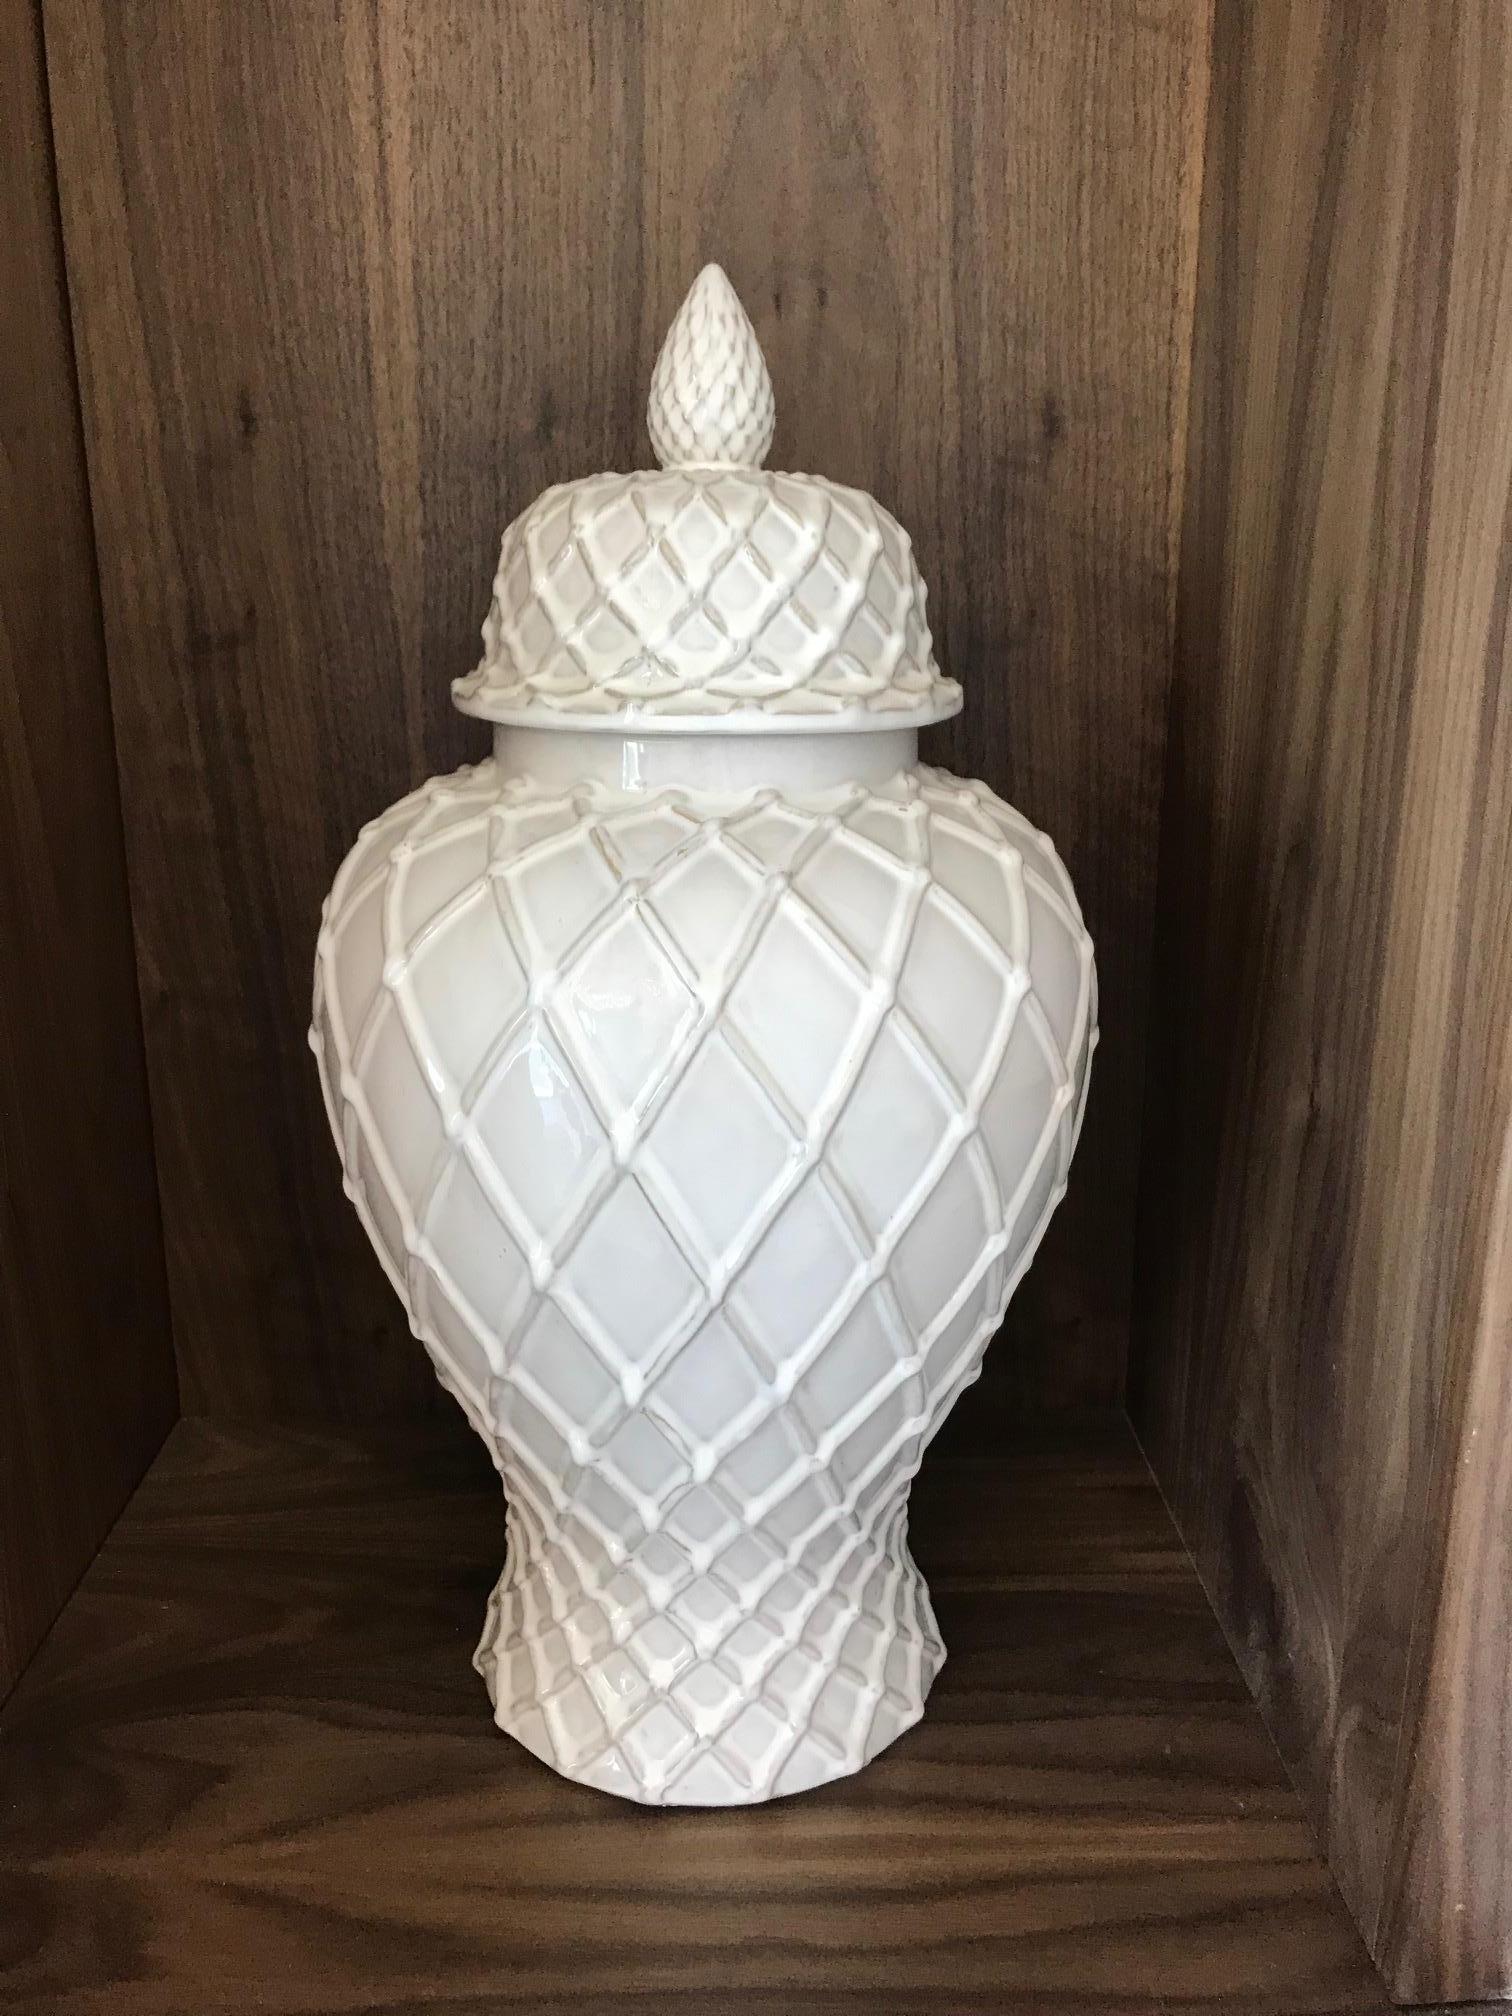 Hollywood Regency large pottery ginger jar with lid has gorgeous urn form with white glaze finish. Features both Chinese and Moorish inspired designs with lattice work throughout. Has tapered base and the lid features a stylized acorn finial or